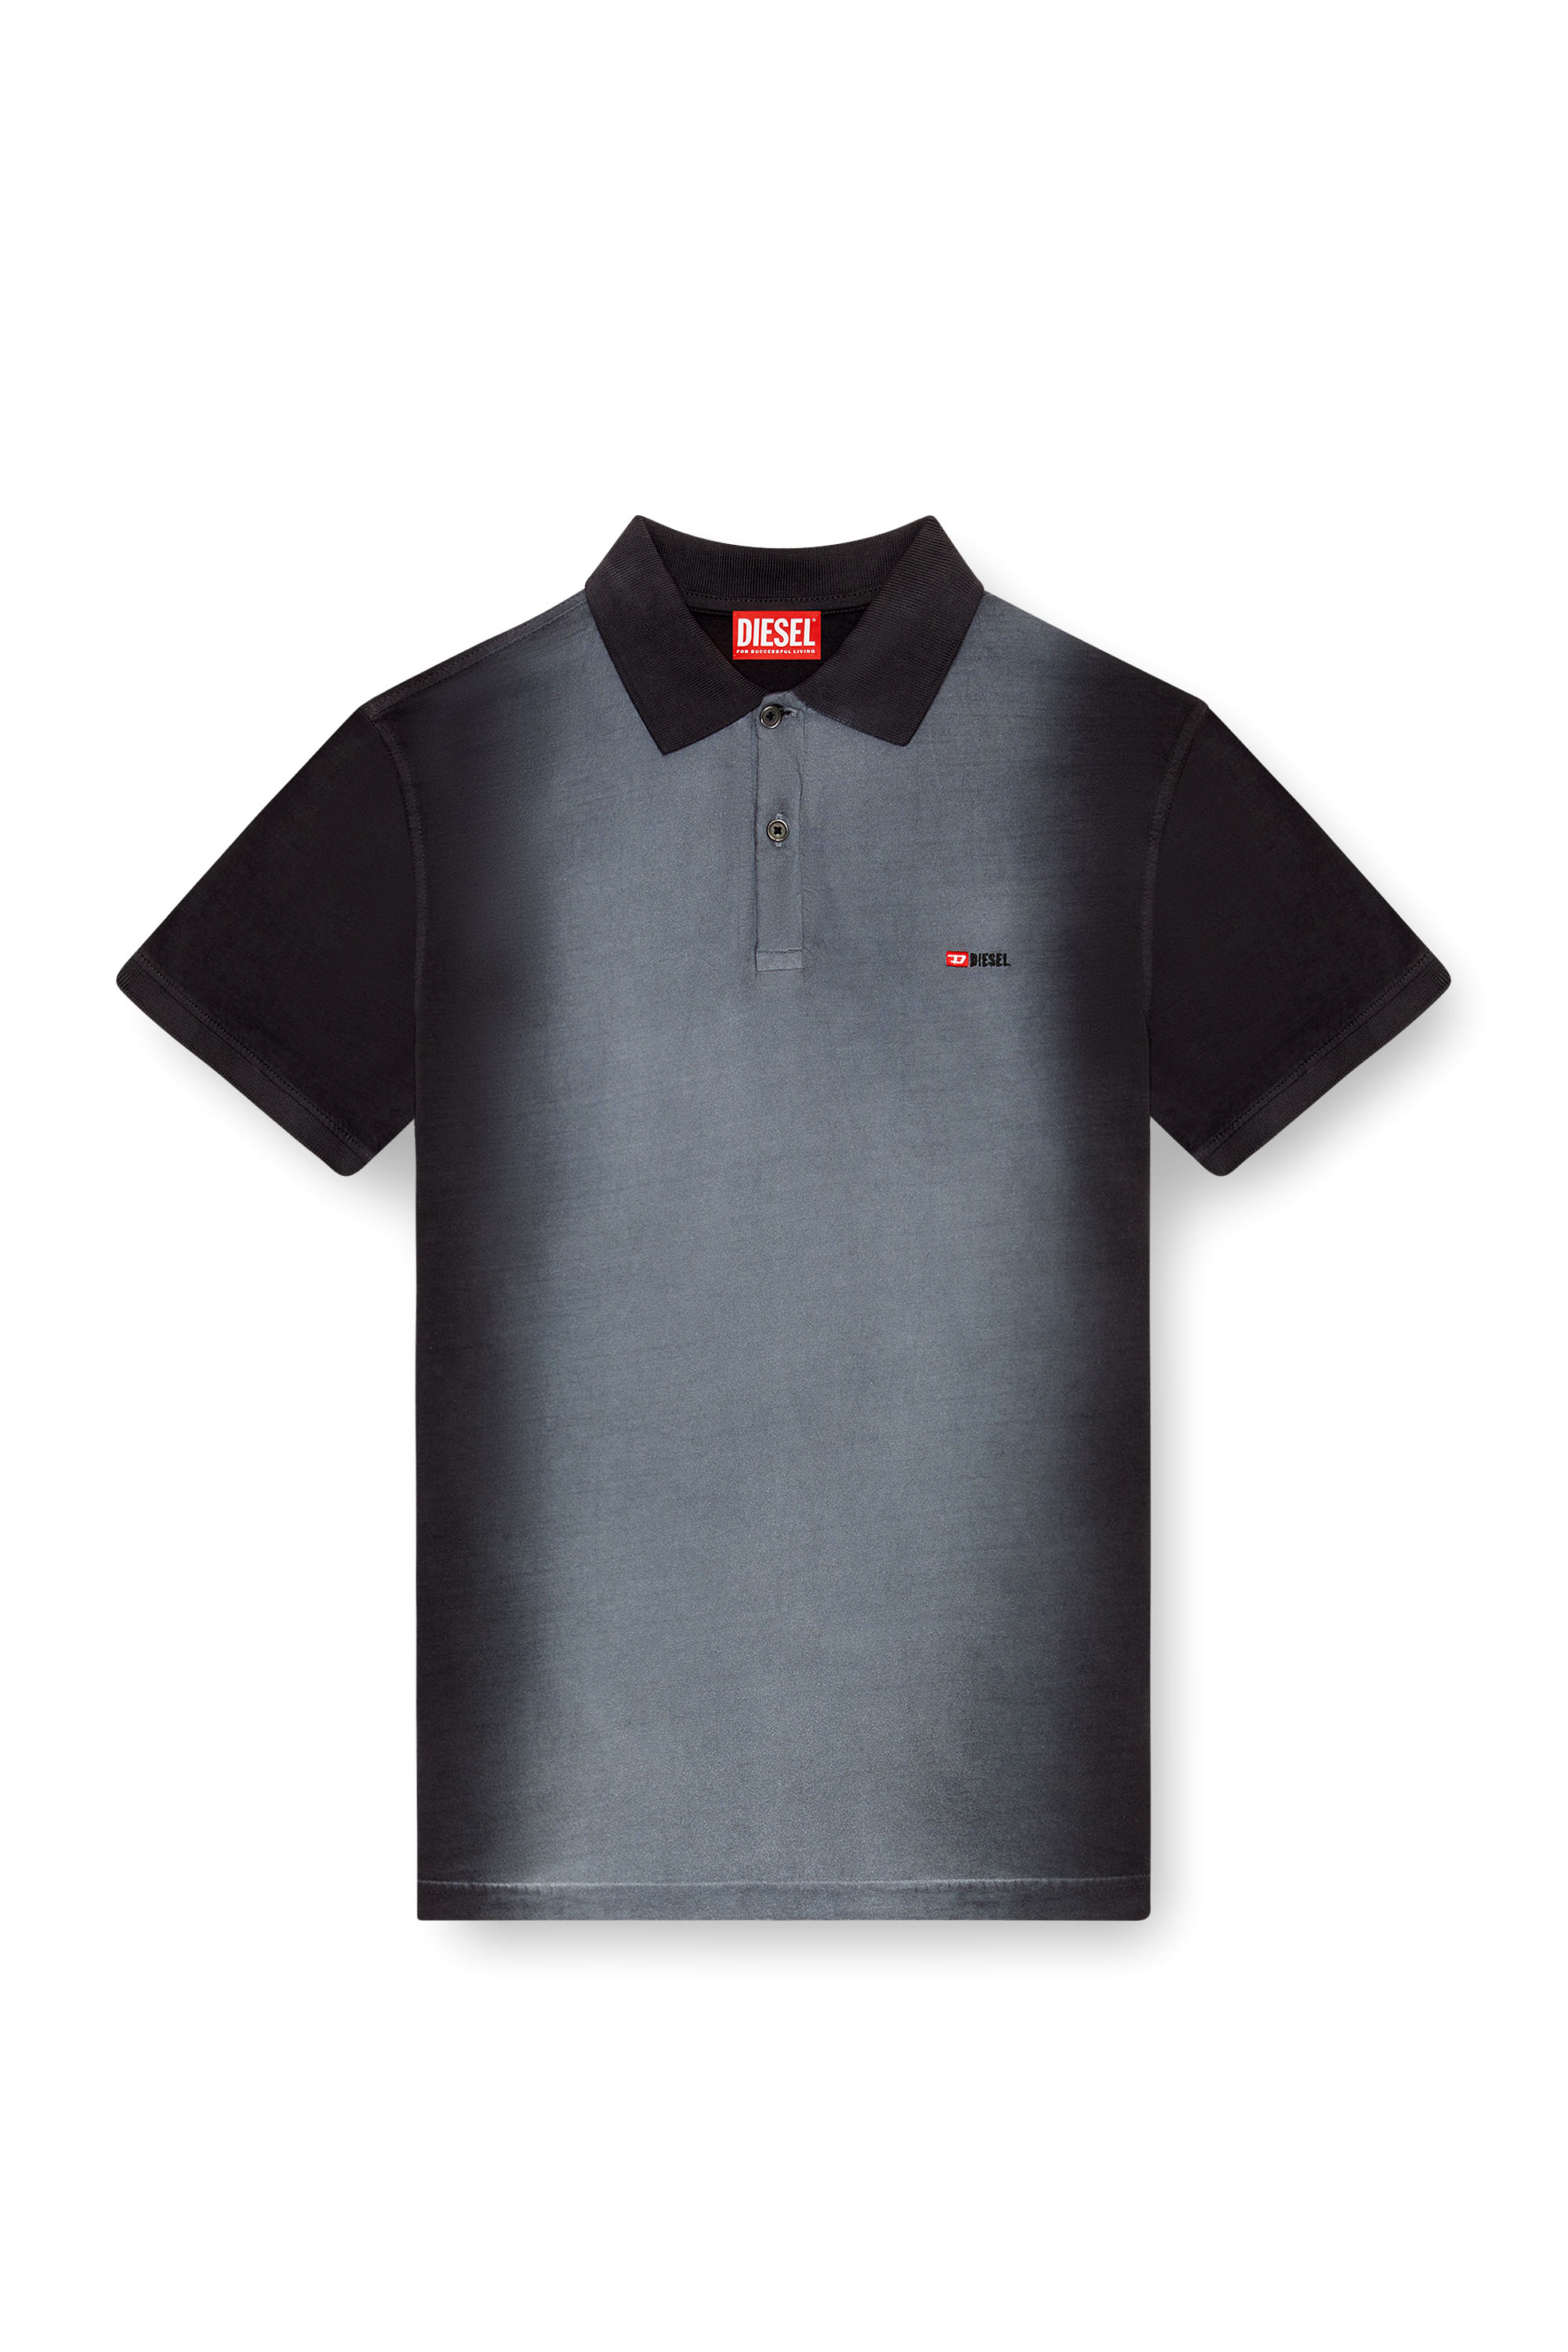 Diesel - T-REJUST-Q1, Man Polo shirt with spray treatment in Black - Image 3